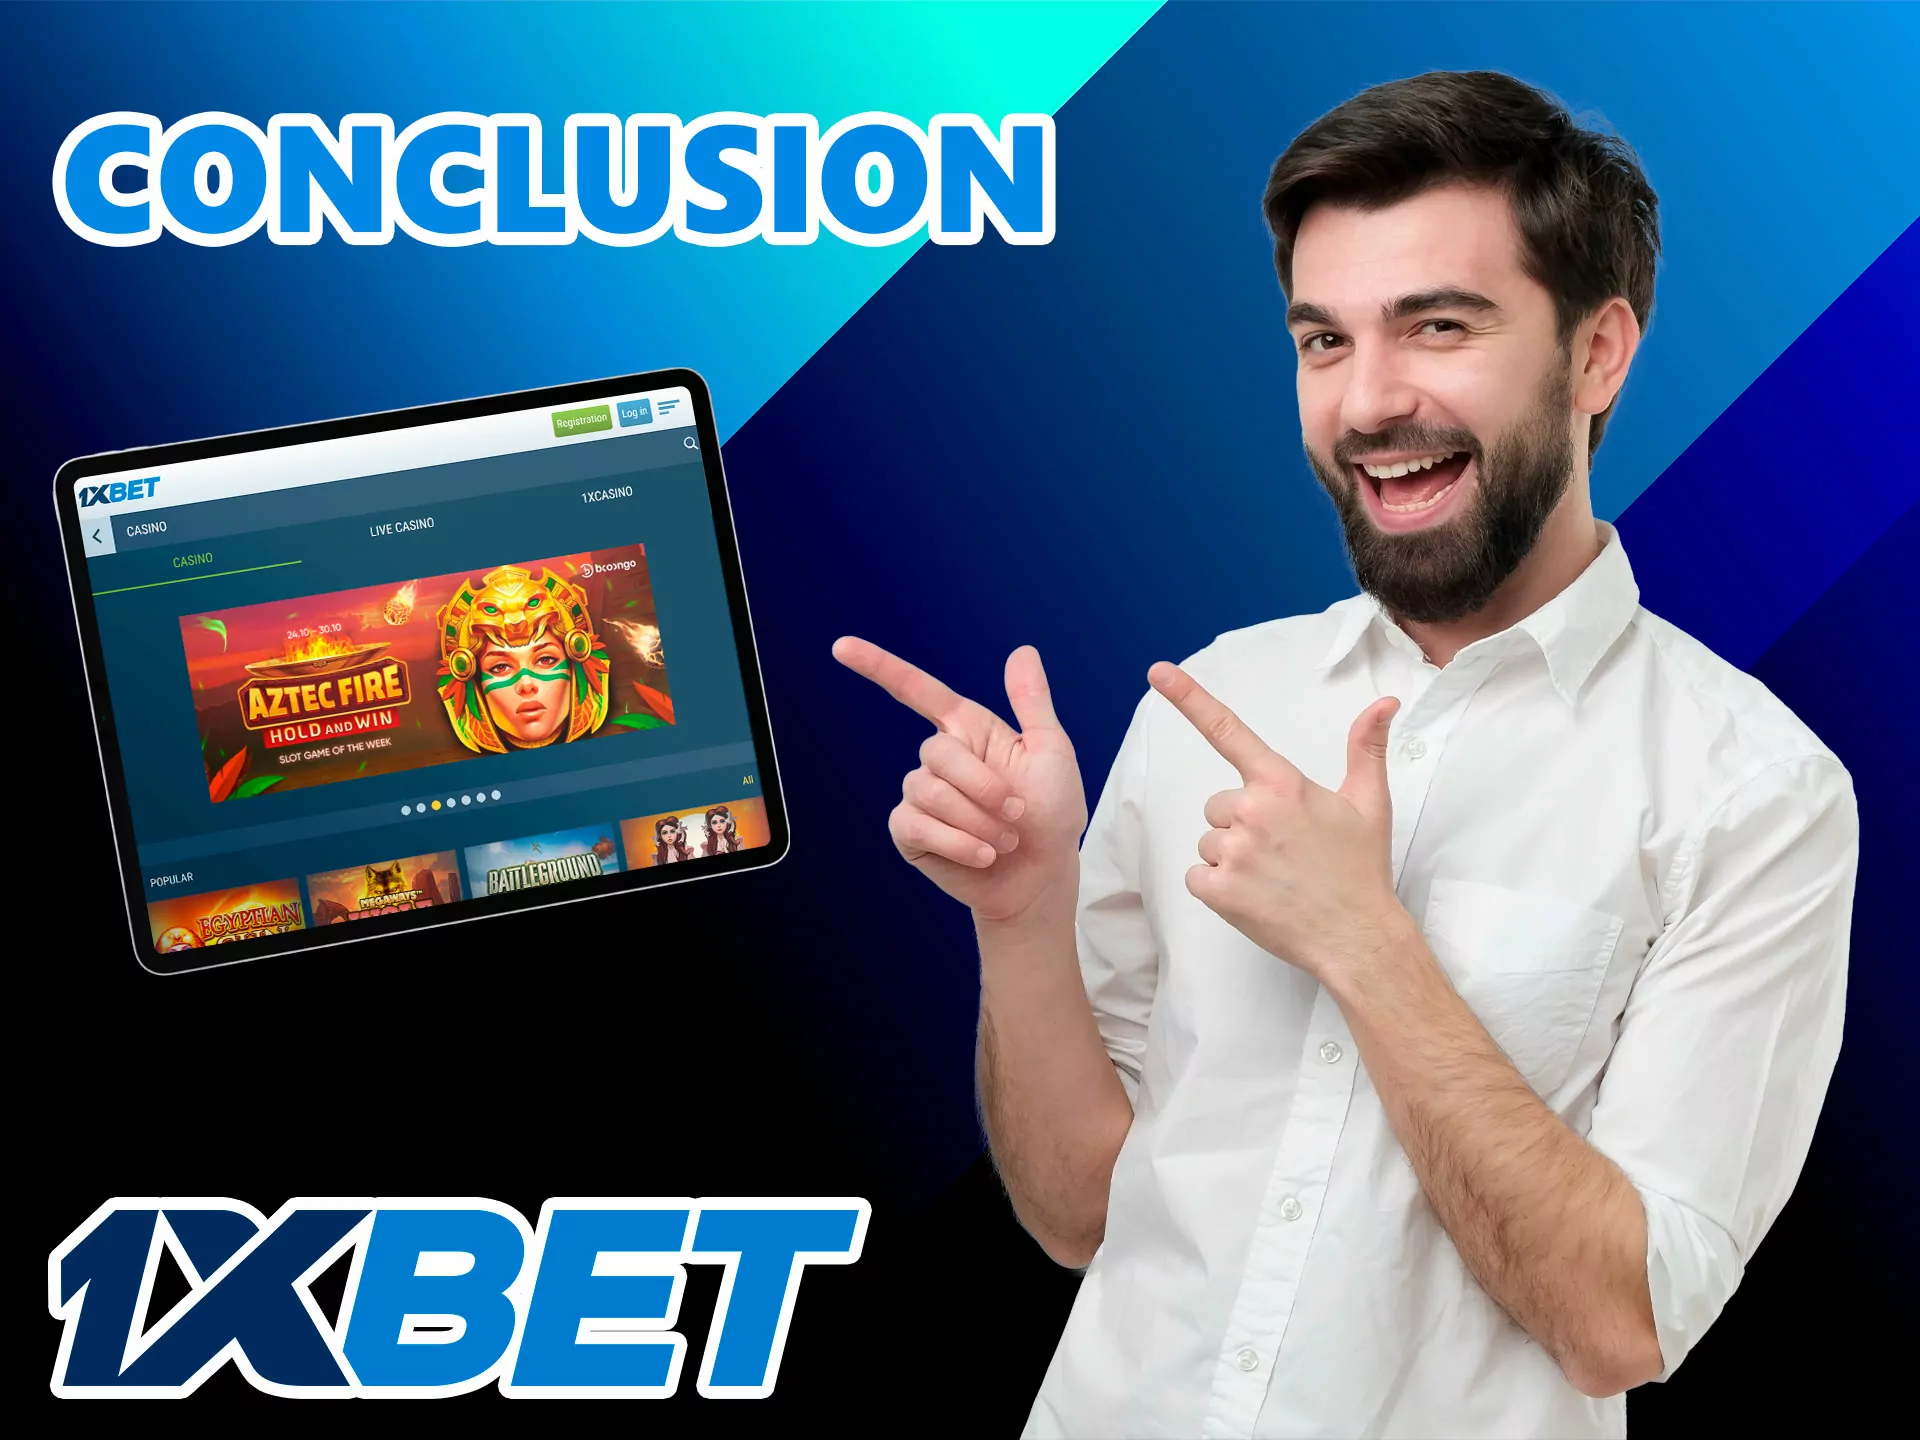 An excellent casino with a huge range of games, all categories on the site have convenient search filters, unique game design - all this makes 1xbet attractive among players from Bngadesh.